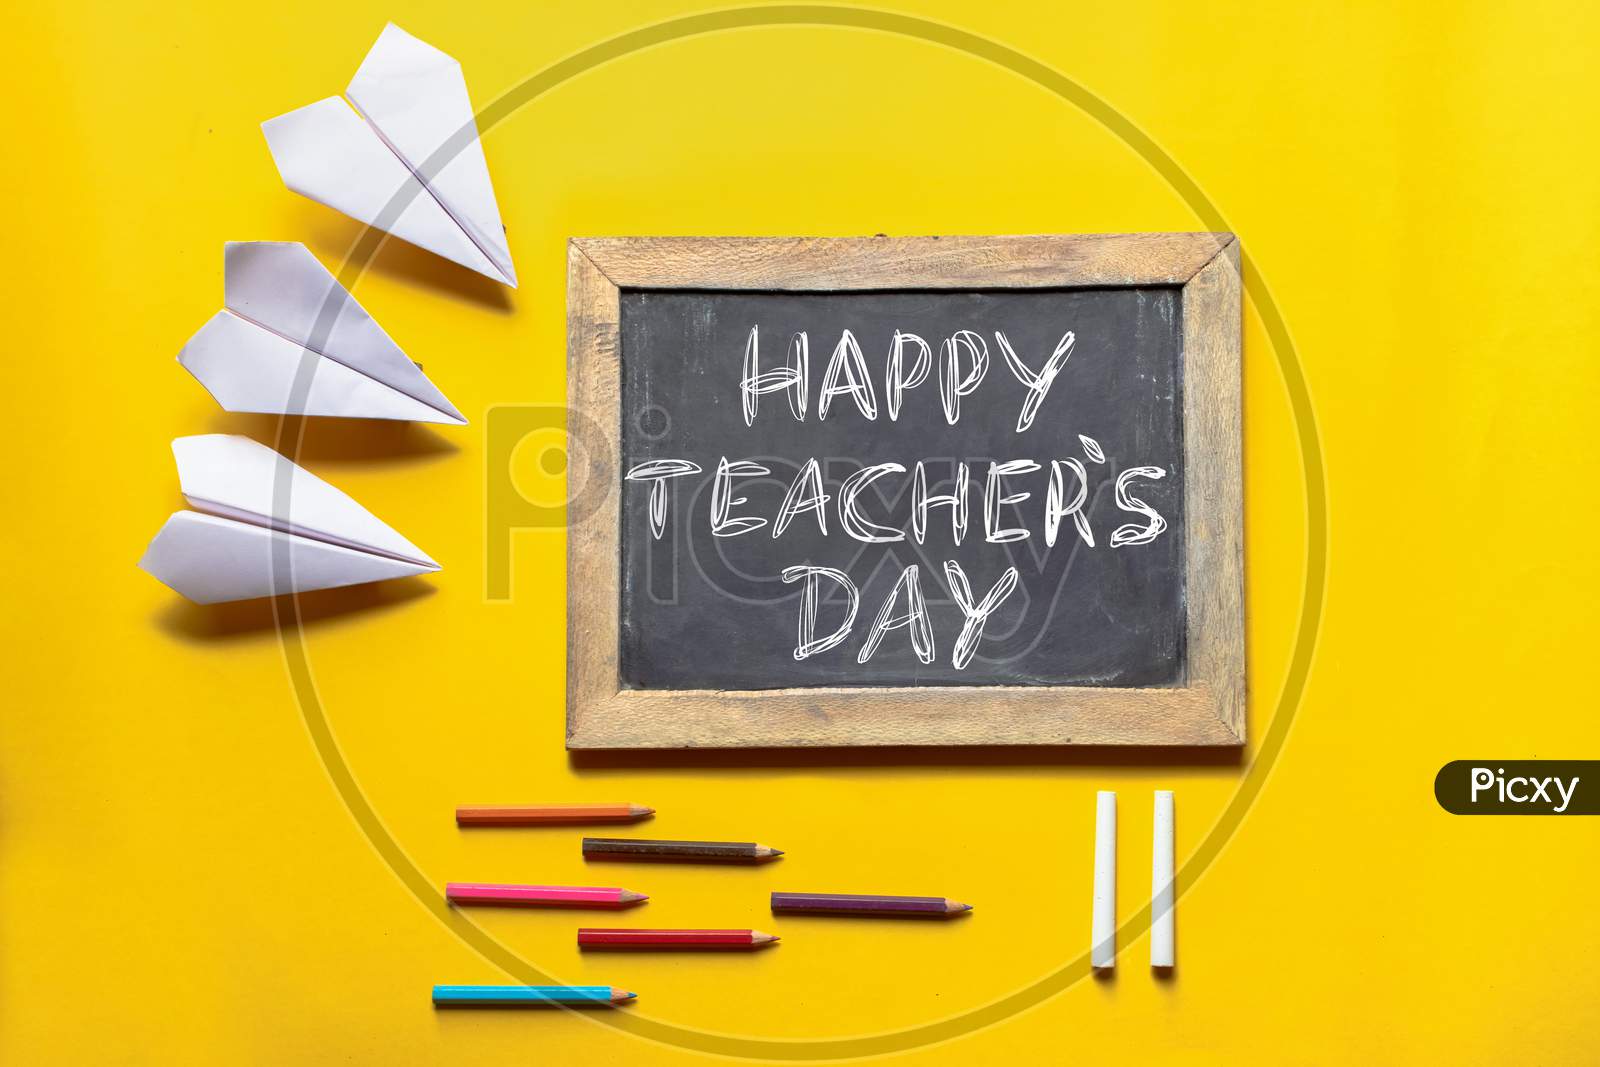 Happy Teacher's Day Conceptual Photo With Paper Plane, Slate Board, Color Pencils And Chalk